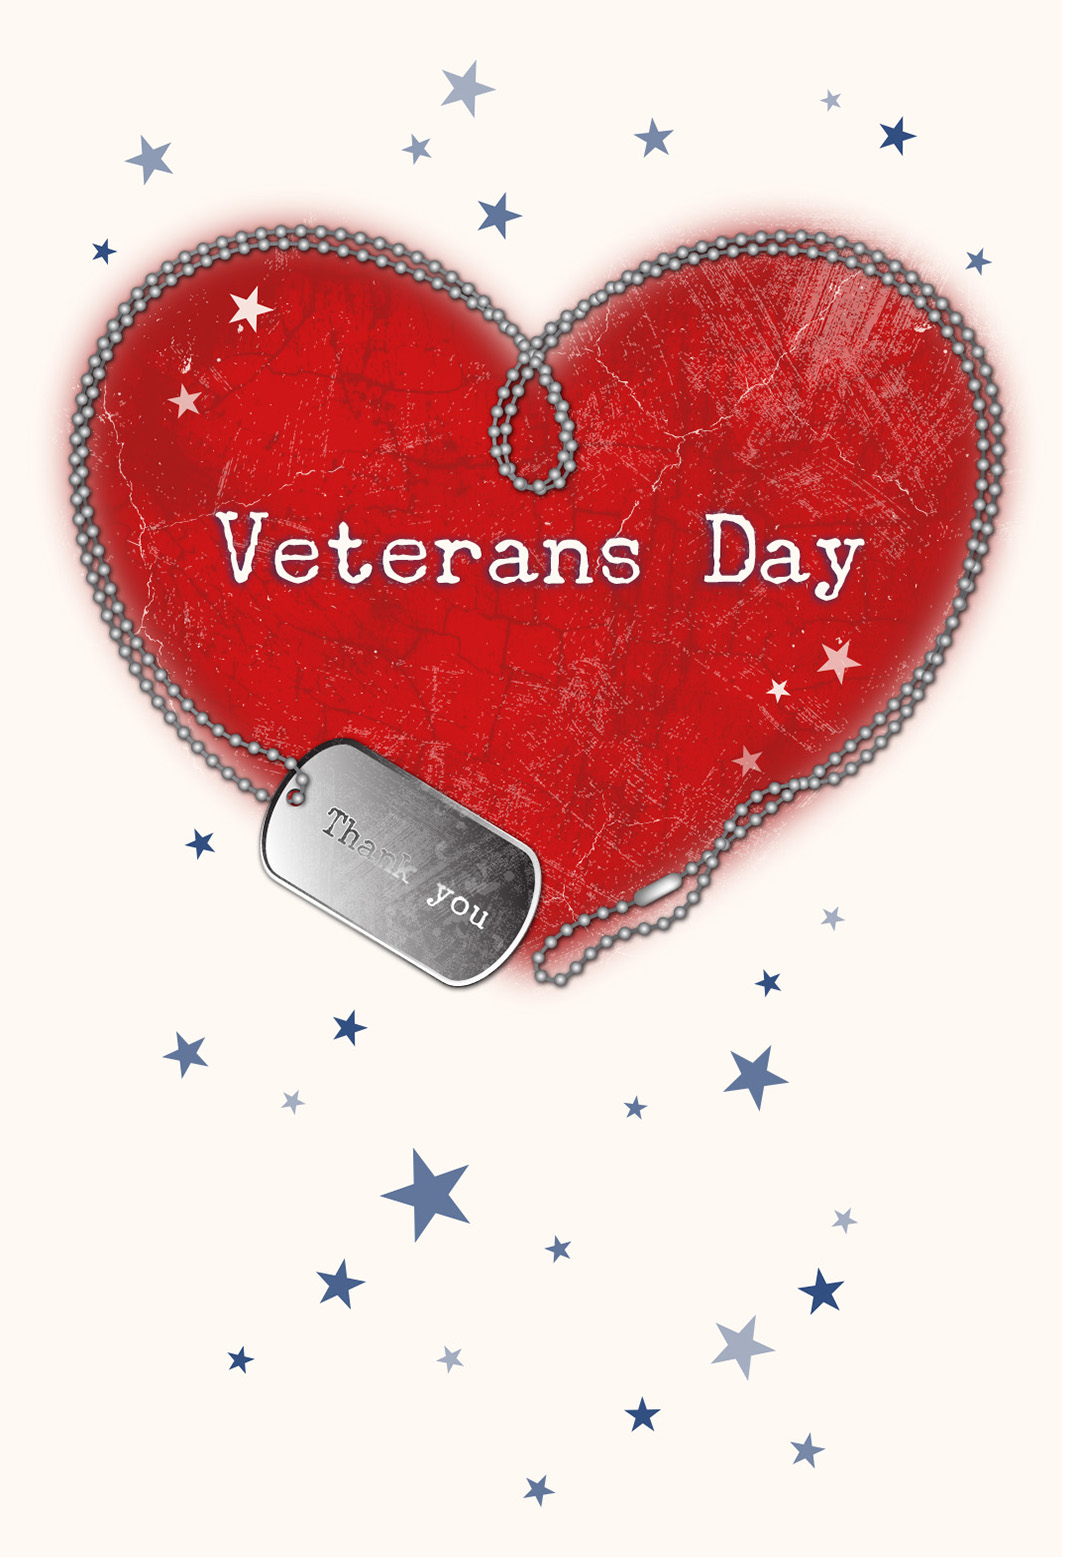 Veterans Day Appreciation - Free Veterans Day Card | Greetings Island - Veterans Day Free Printable Cards